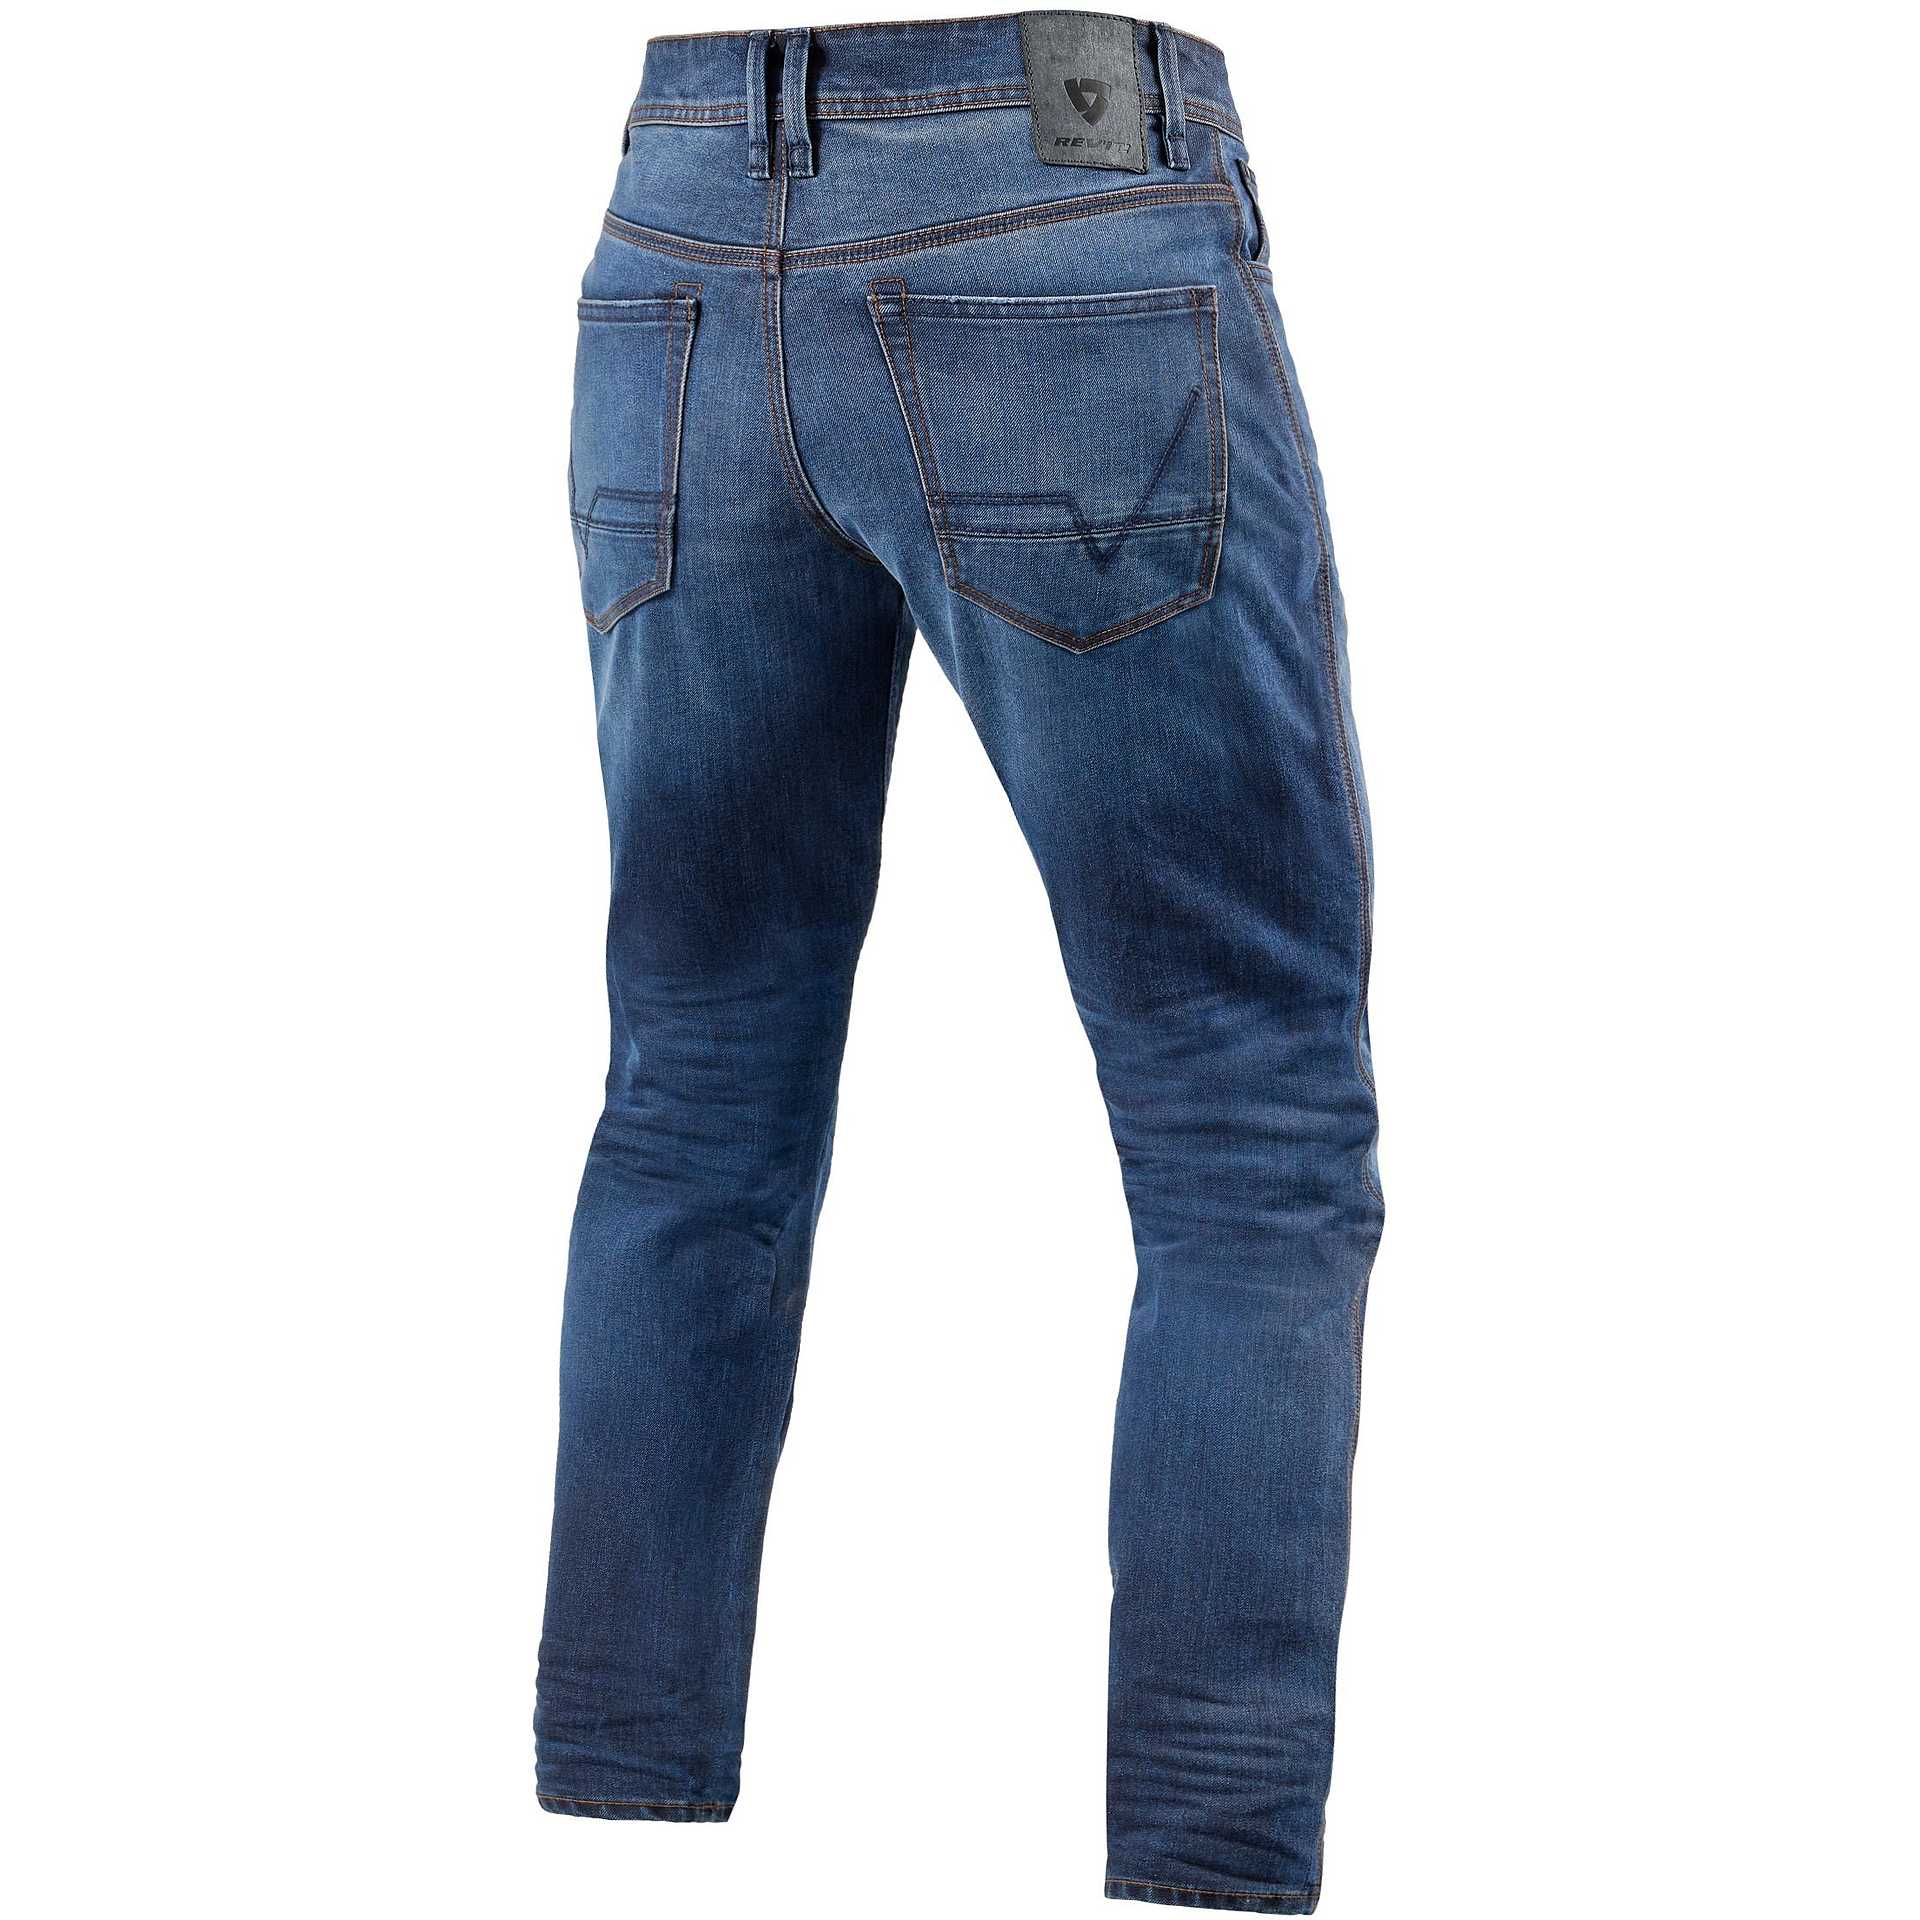 Rev'it REED SF Motorcycle Jeans Medium Washed Blue L36 For Sale Online ...